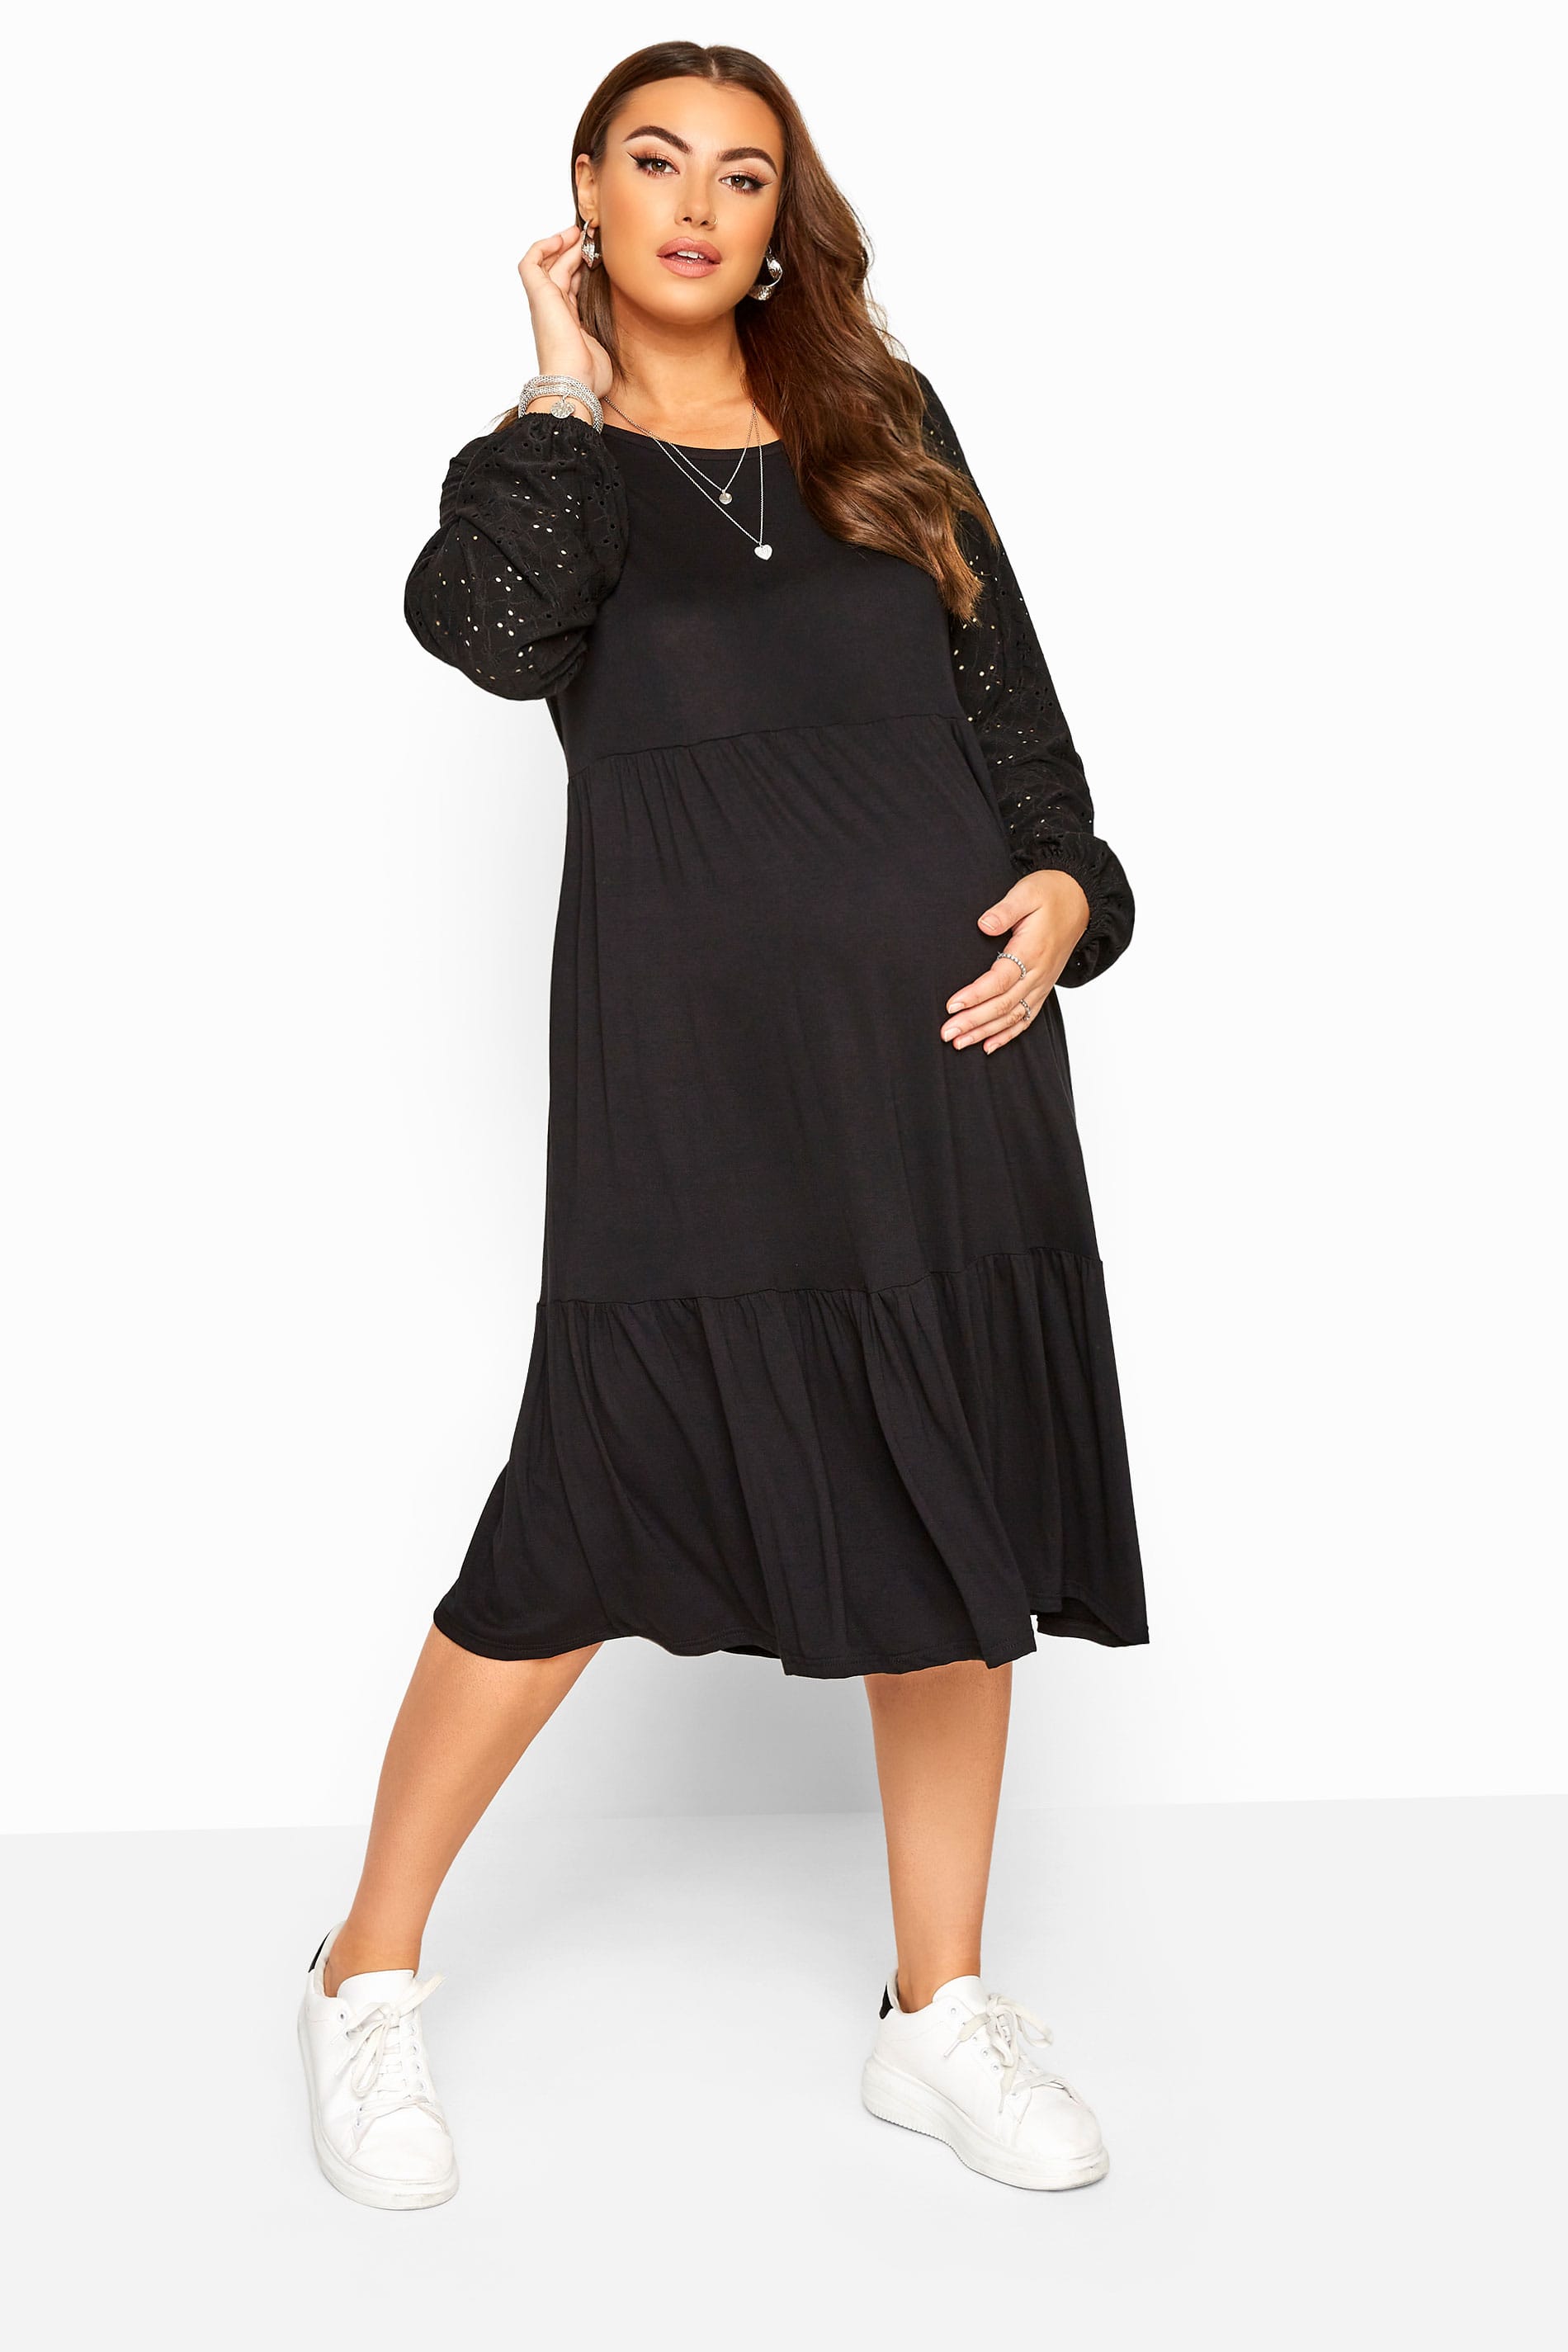 Yours Clothing Bump it up maternity black broderie anglaise sleeve tiered dress